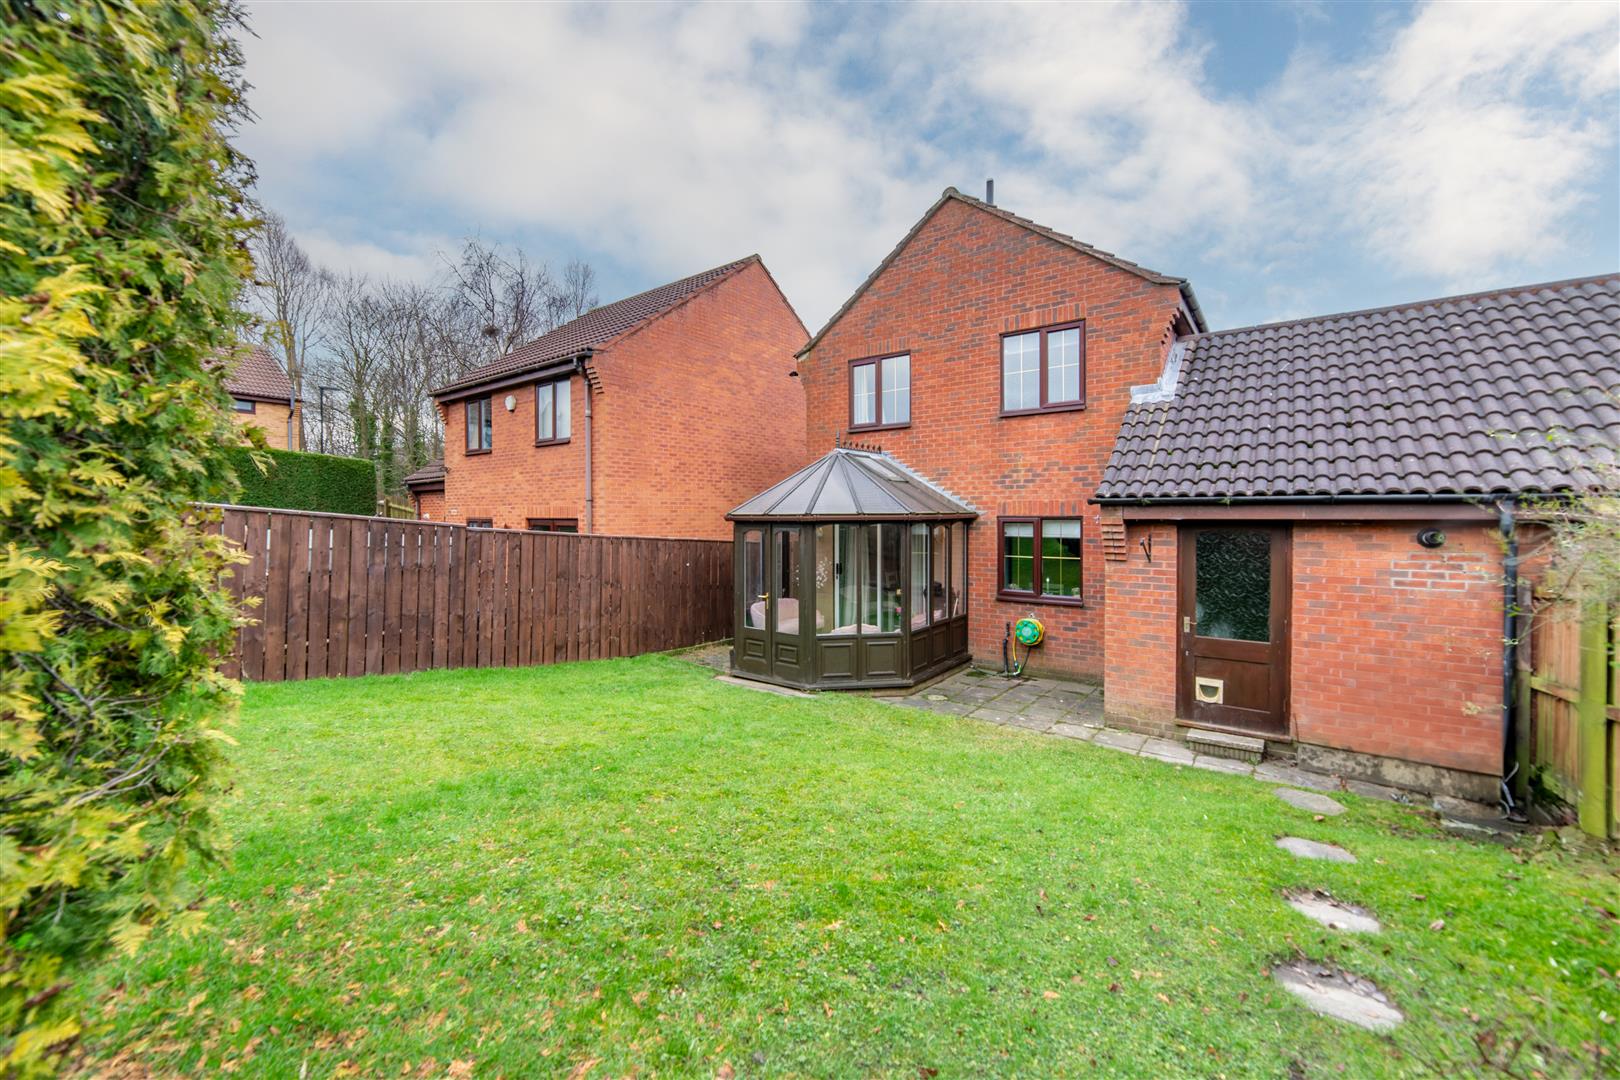 3 bed link detached house for sale in West Wynd, Killingworth 18